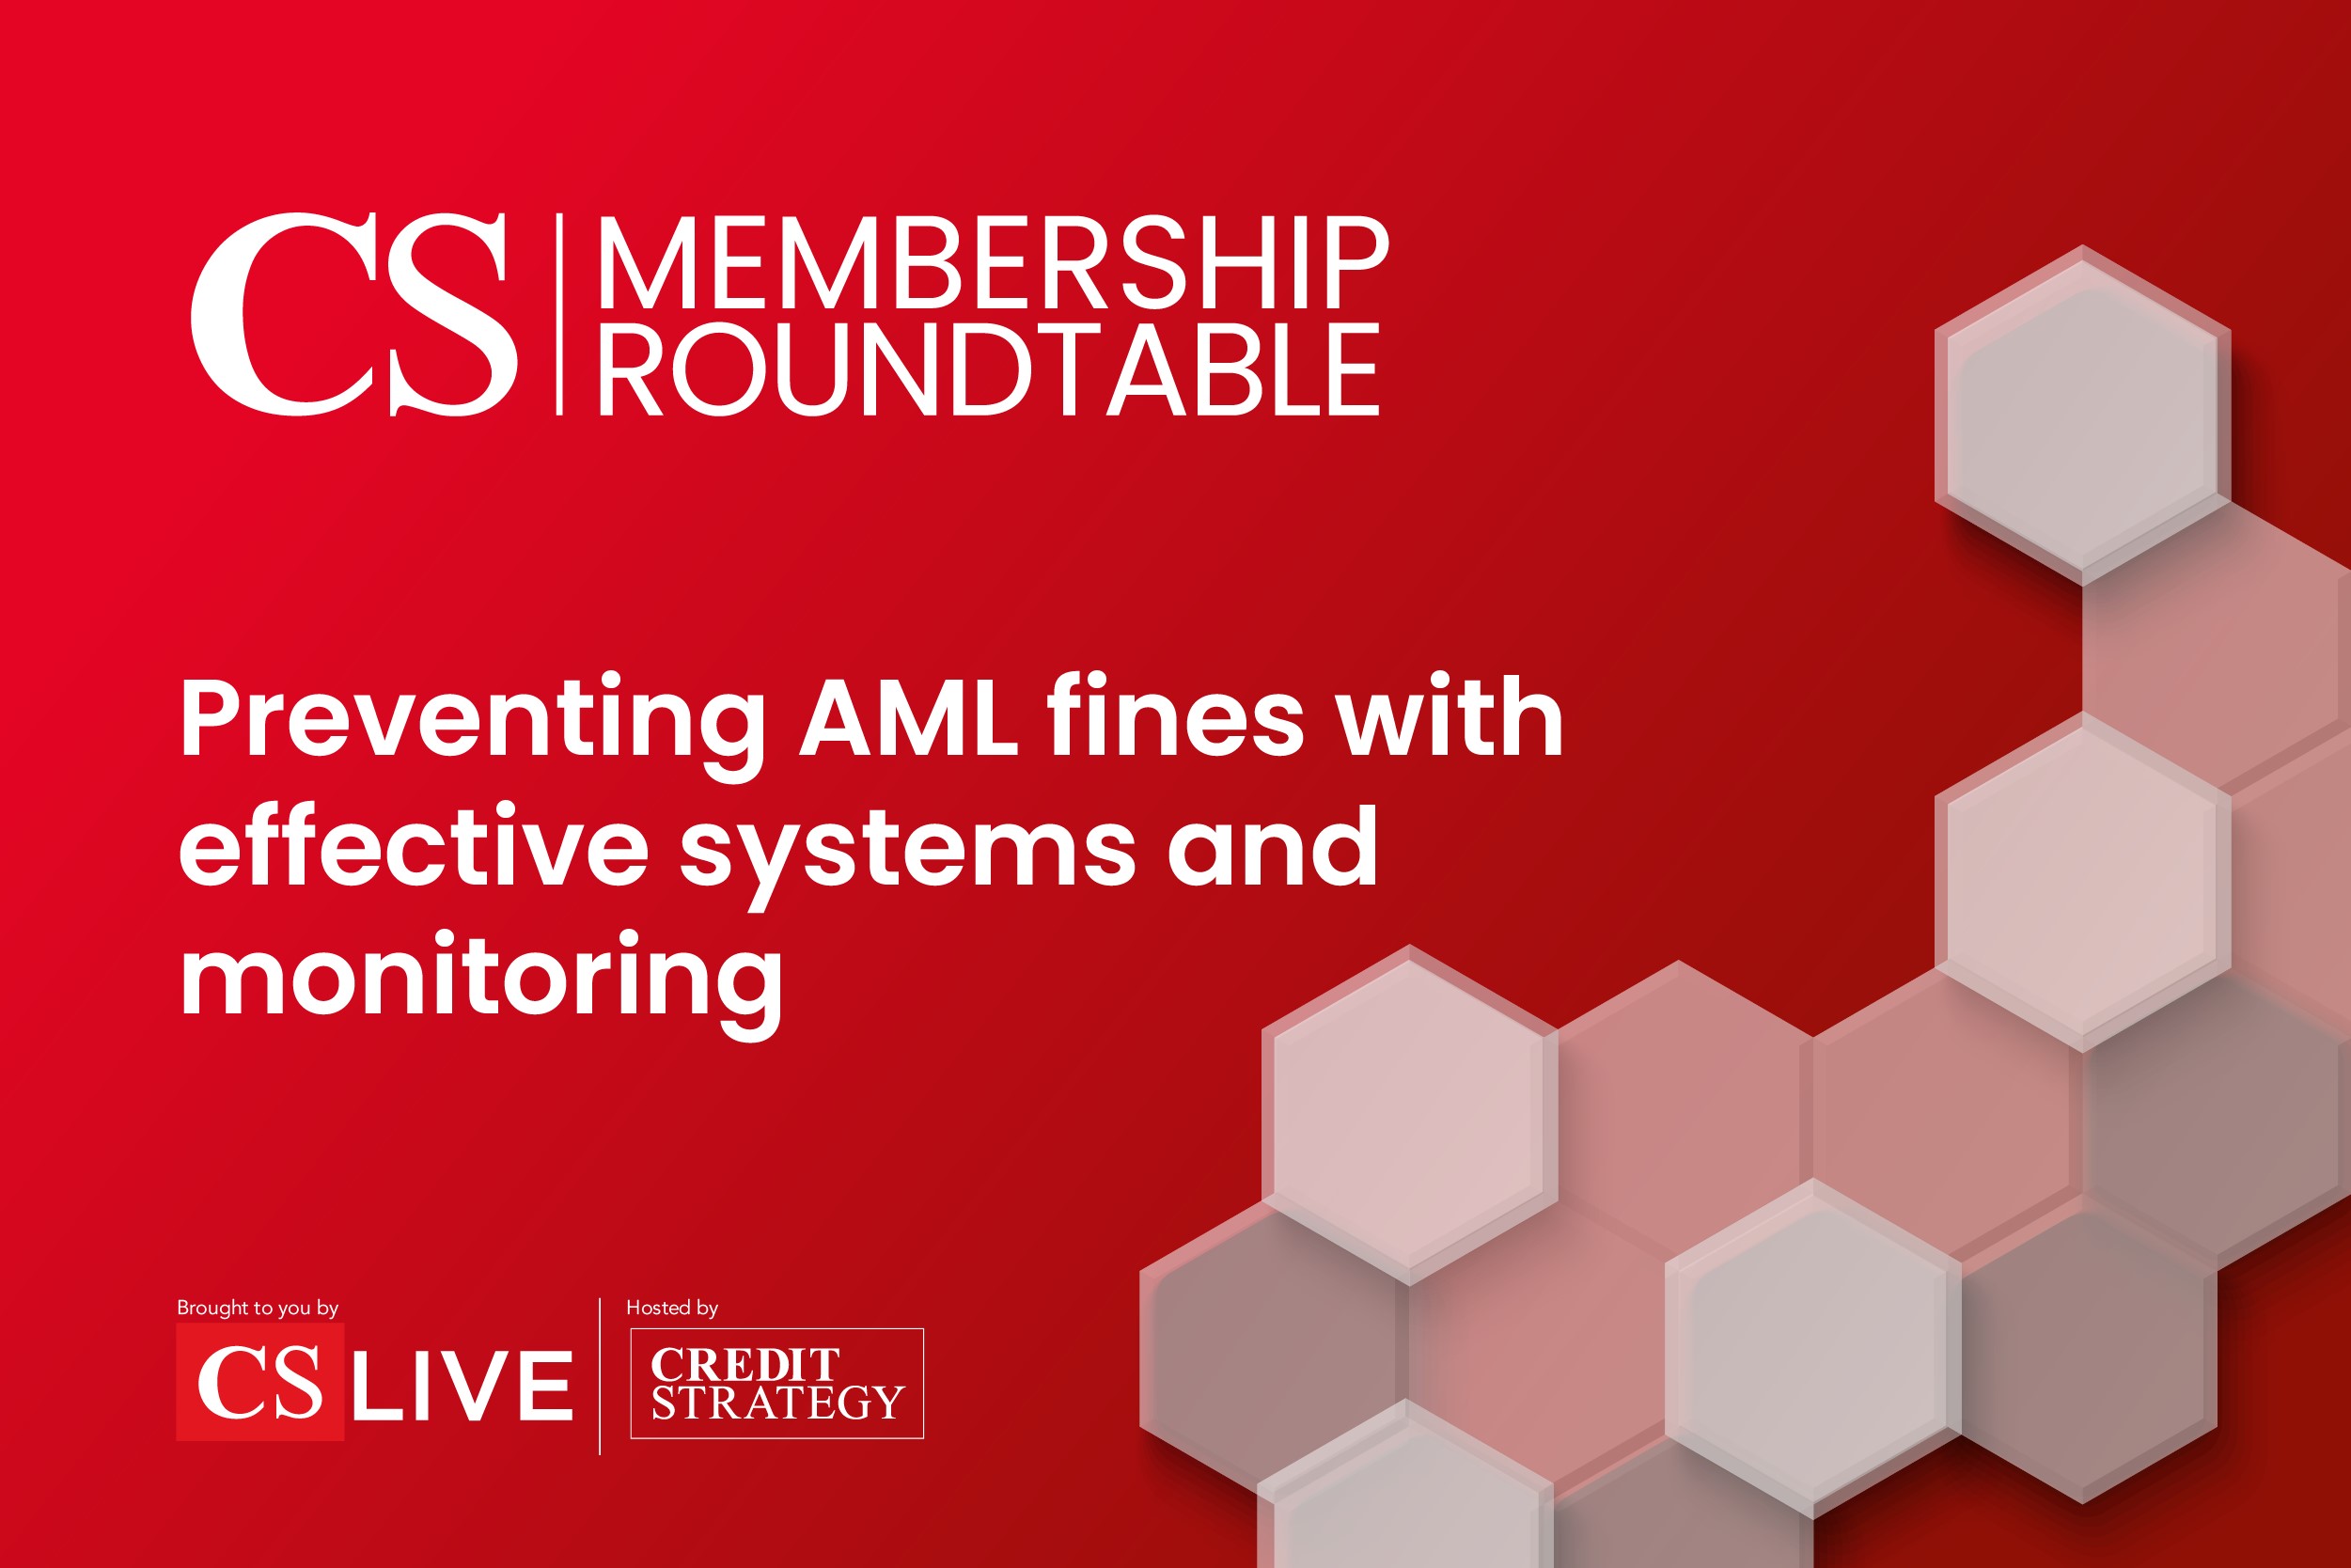 Preventing AML fines with effective systems and monitoring